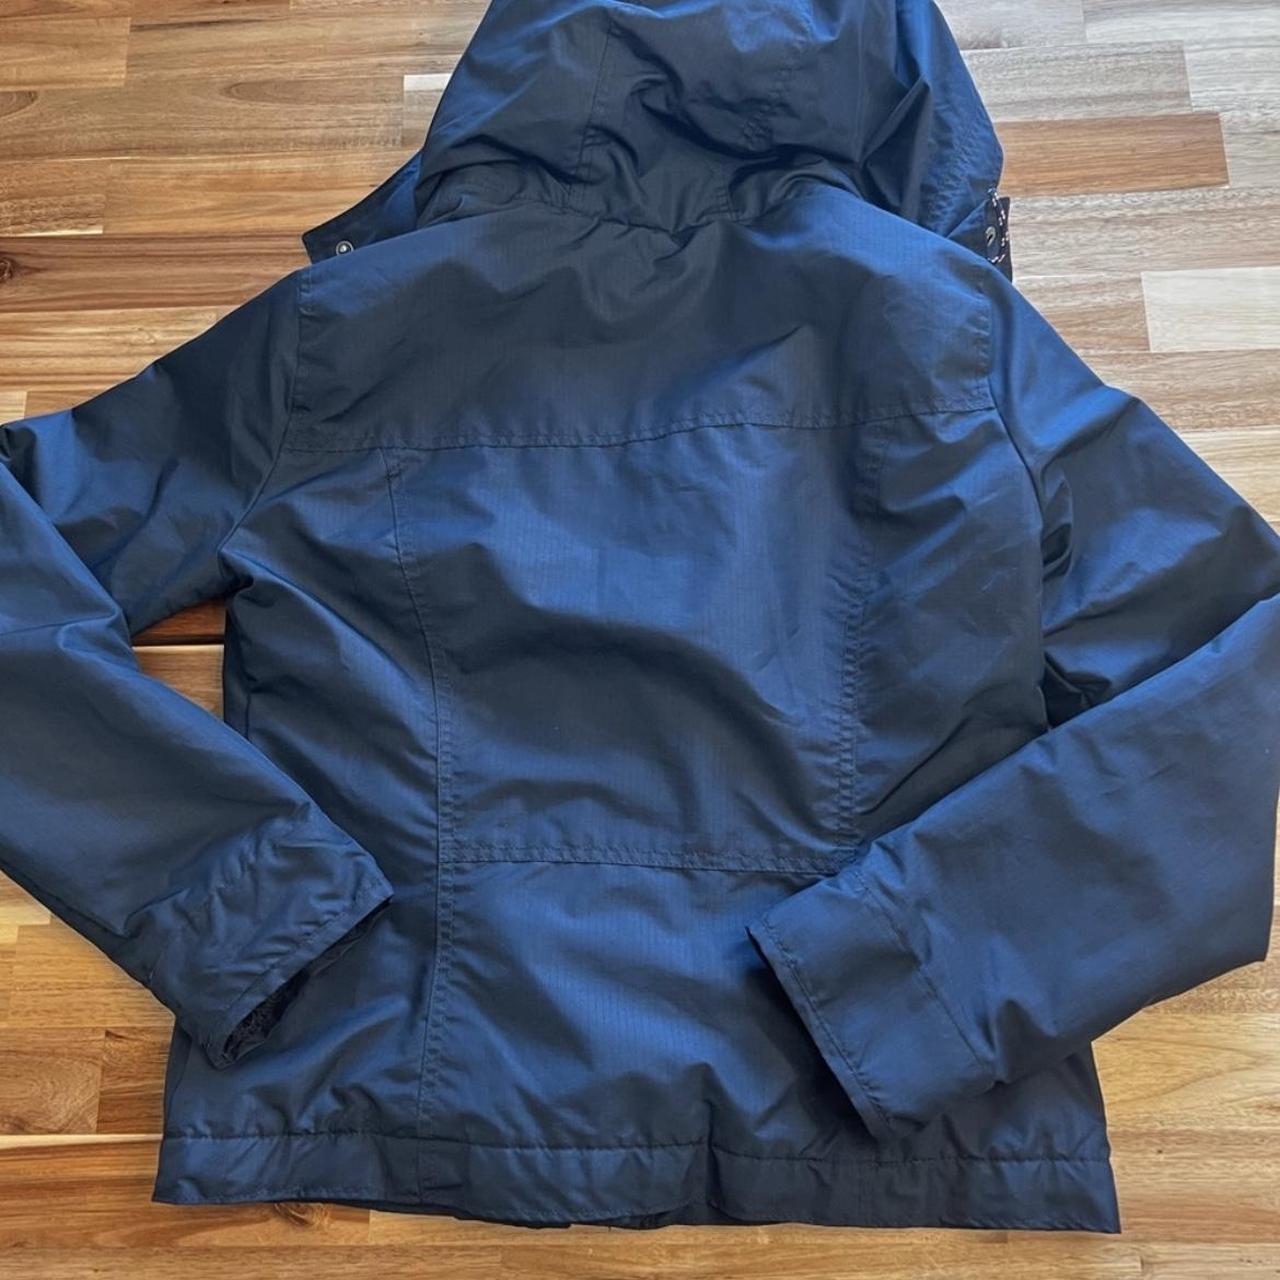 Hollister XS All Weather Jacket Stretch, Navy Blue and Light Pink